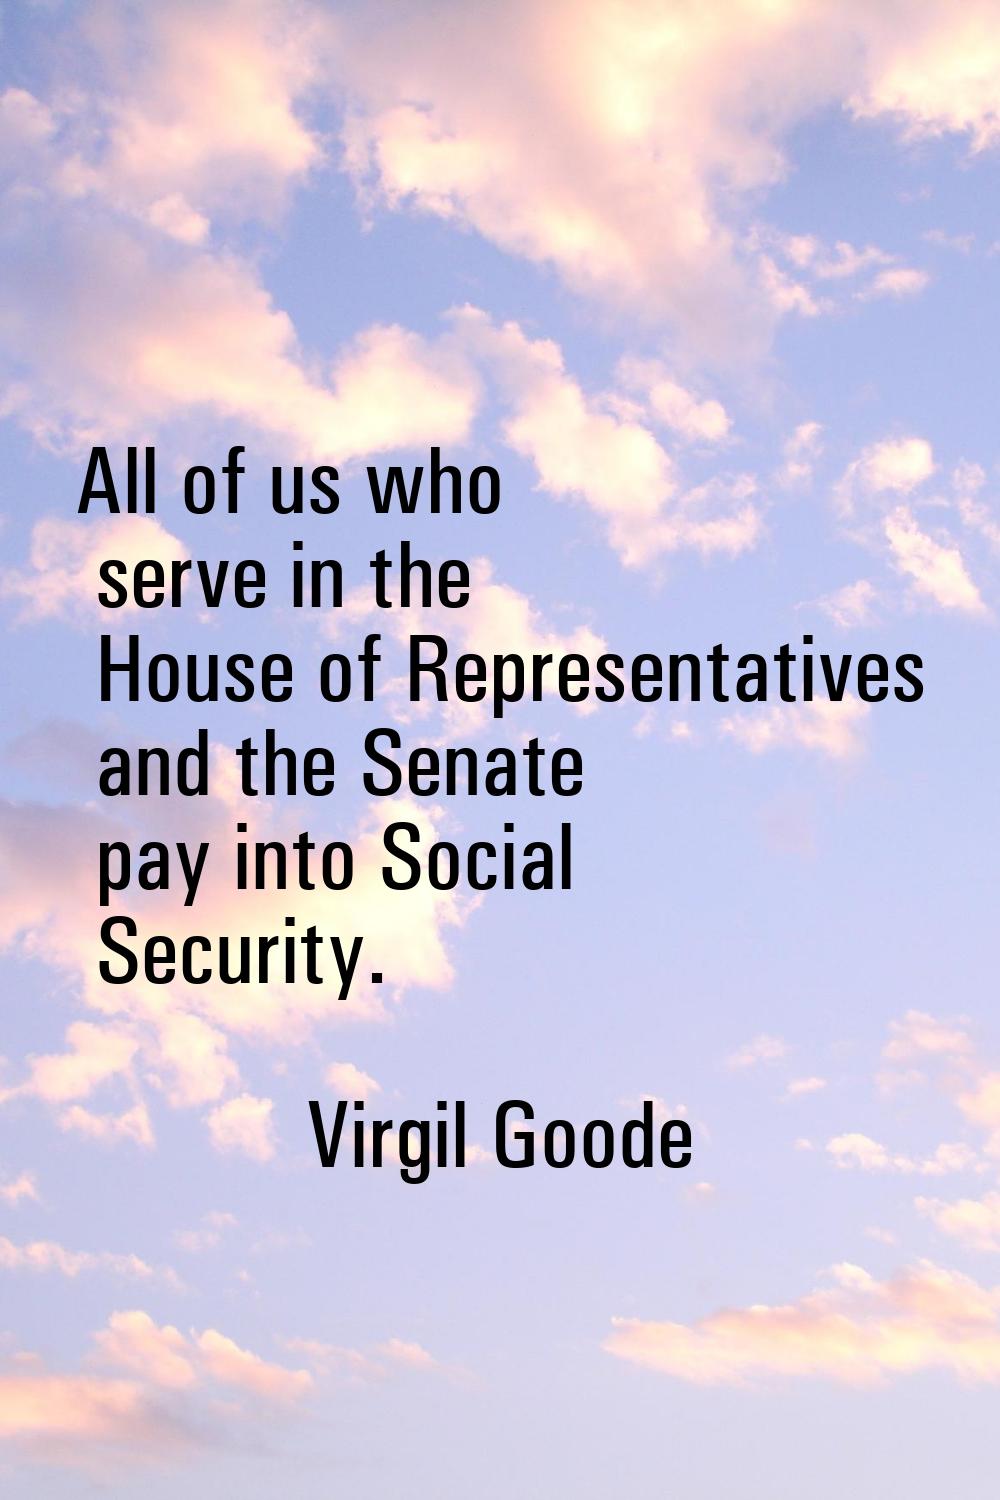 All of us who serve in the House of Representatives and the Senate pay into Social Security.